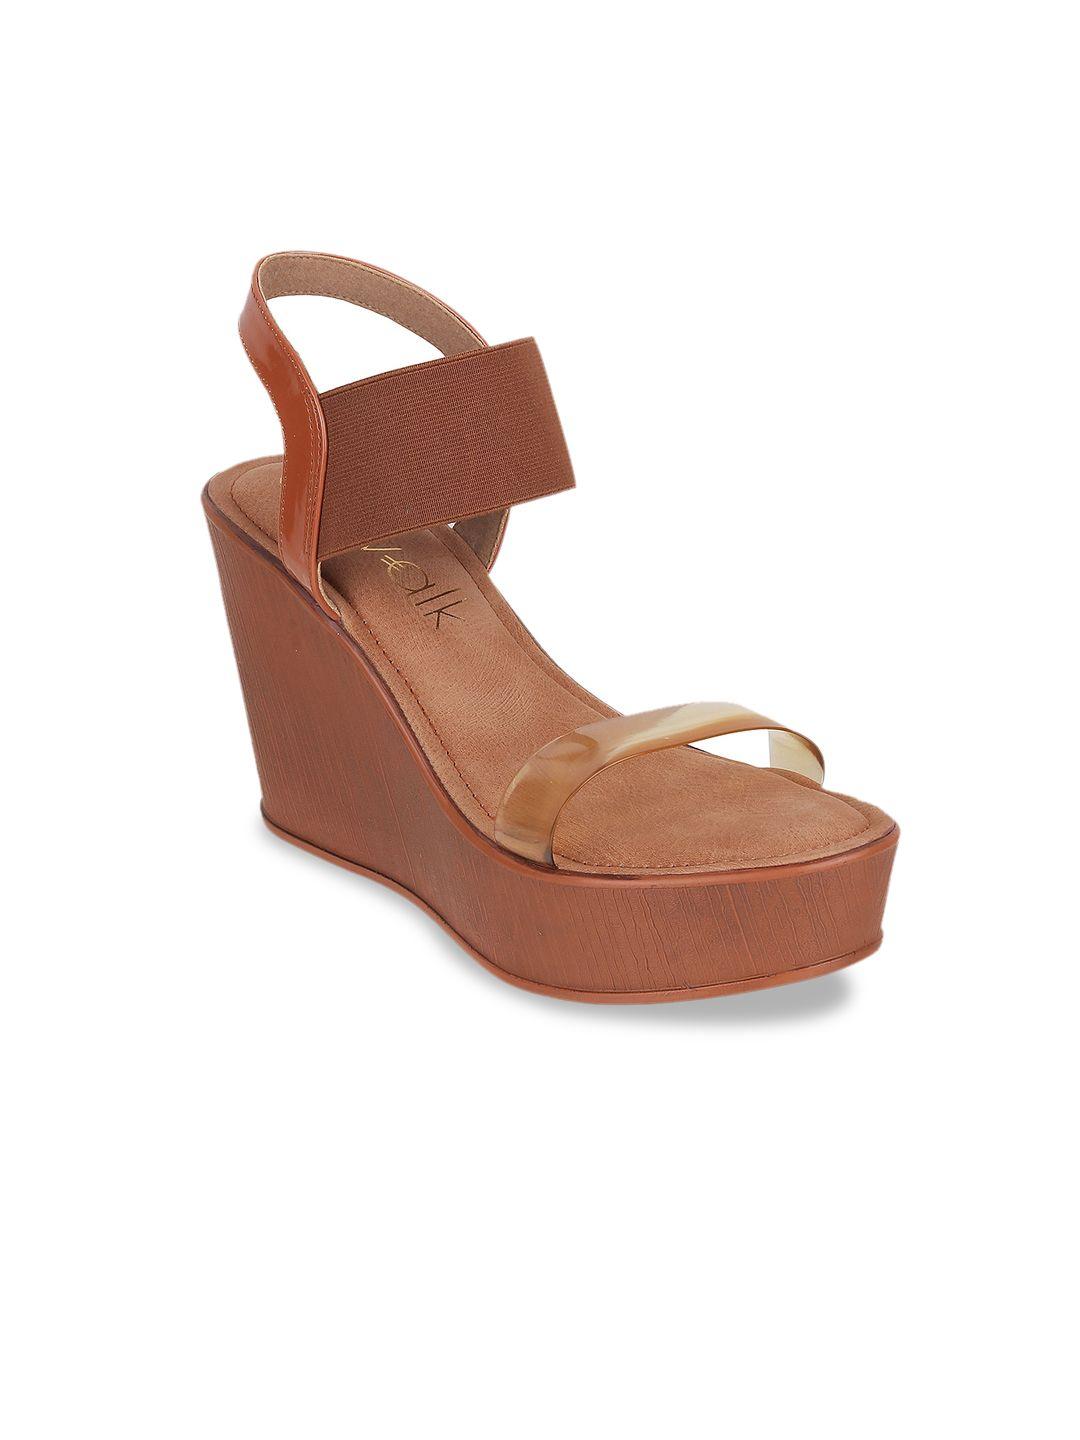 catwalk open toe wedges with backstrap